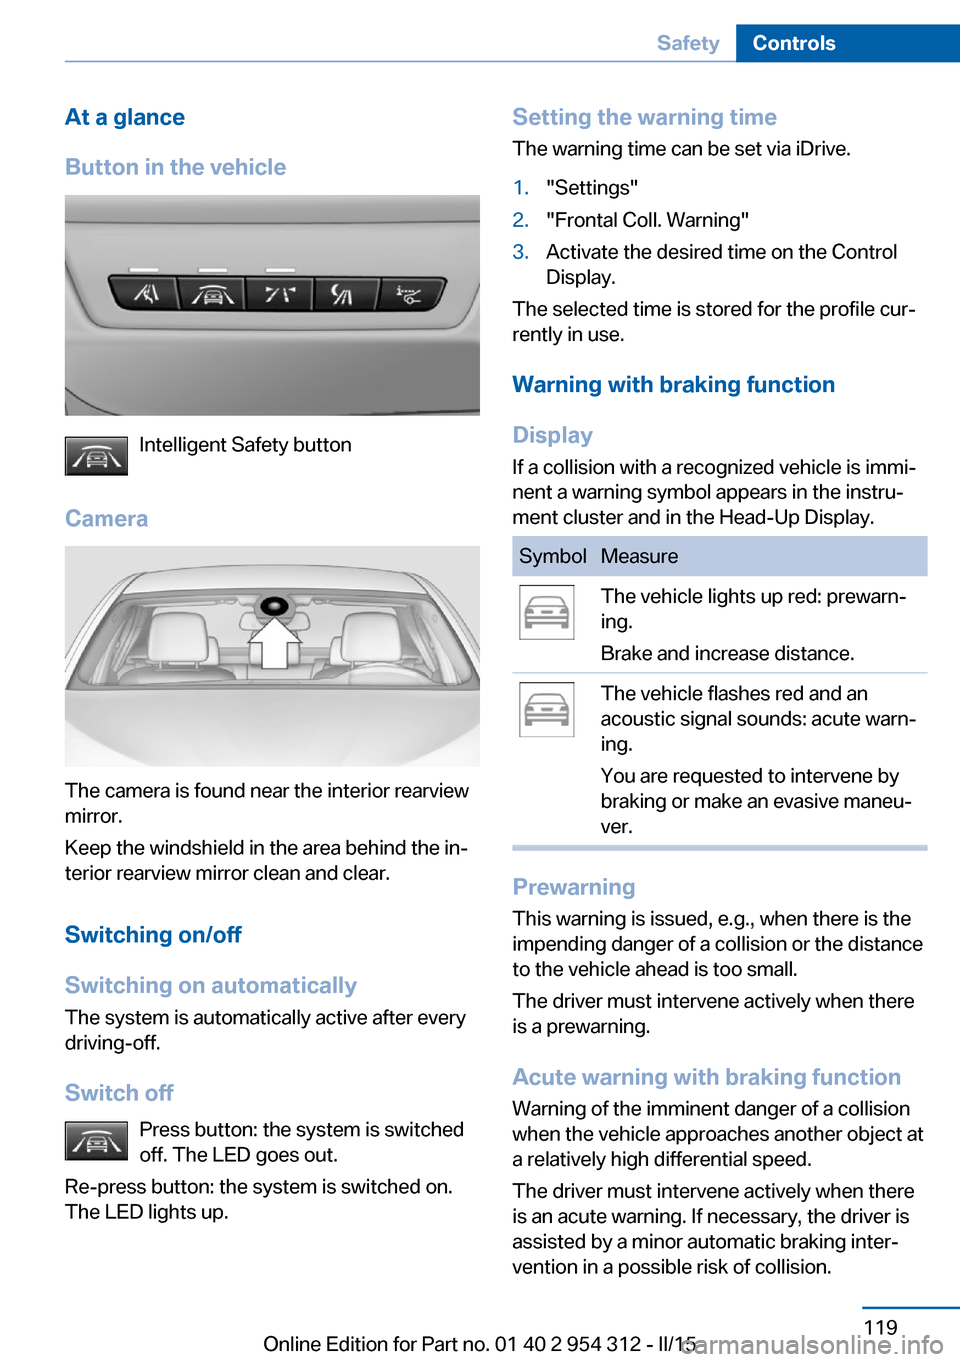 BMW 5 SERIES 2015 F10 Owners Manual At a glance
Button in the vehicle
Intelligent Safety button
Camera
The camera is found near the interior rearview
mirror.
Keep the windshield in the area behind the in‐
terior rearview mirror clean 